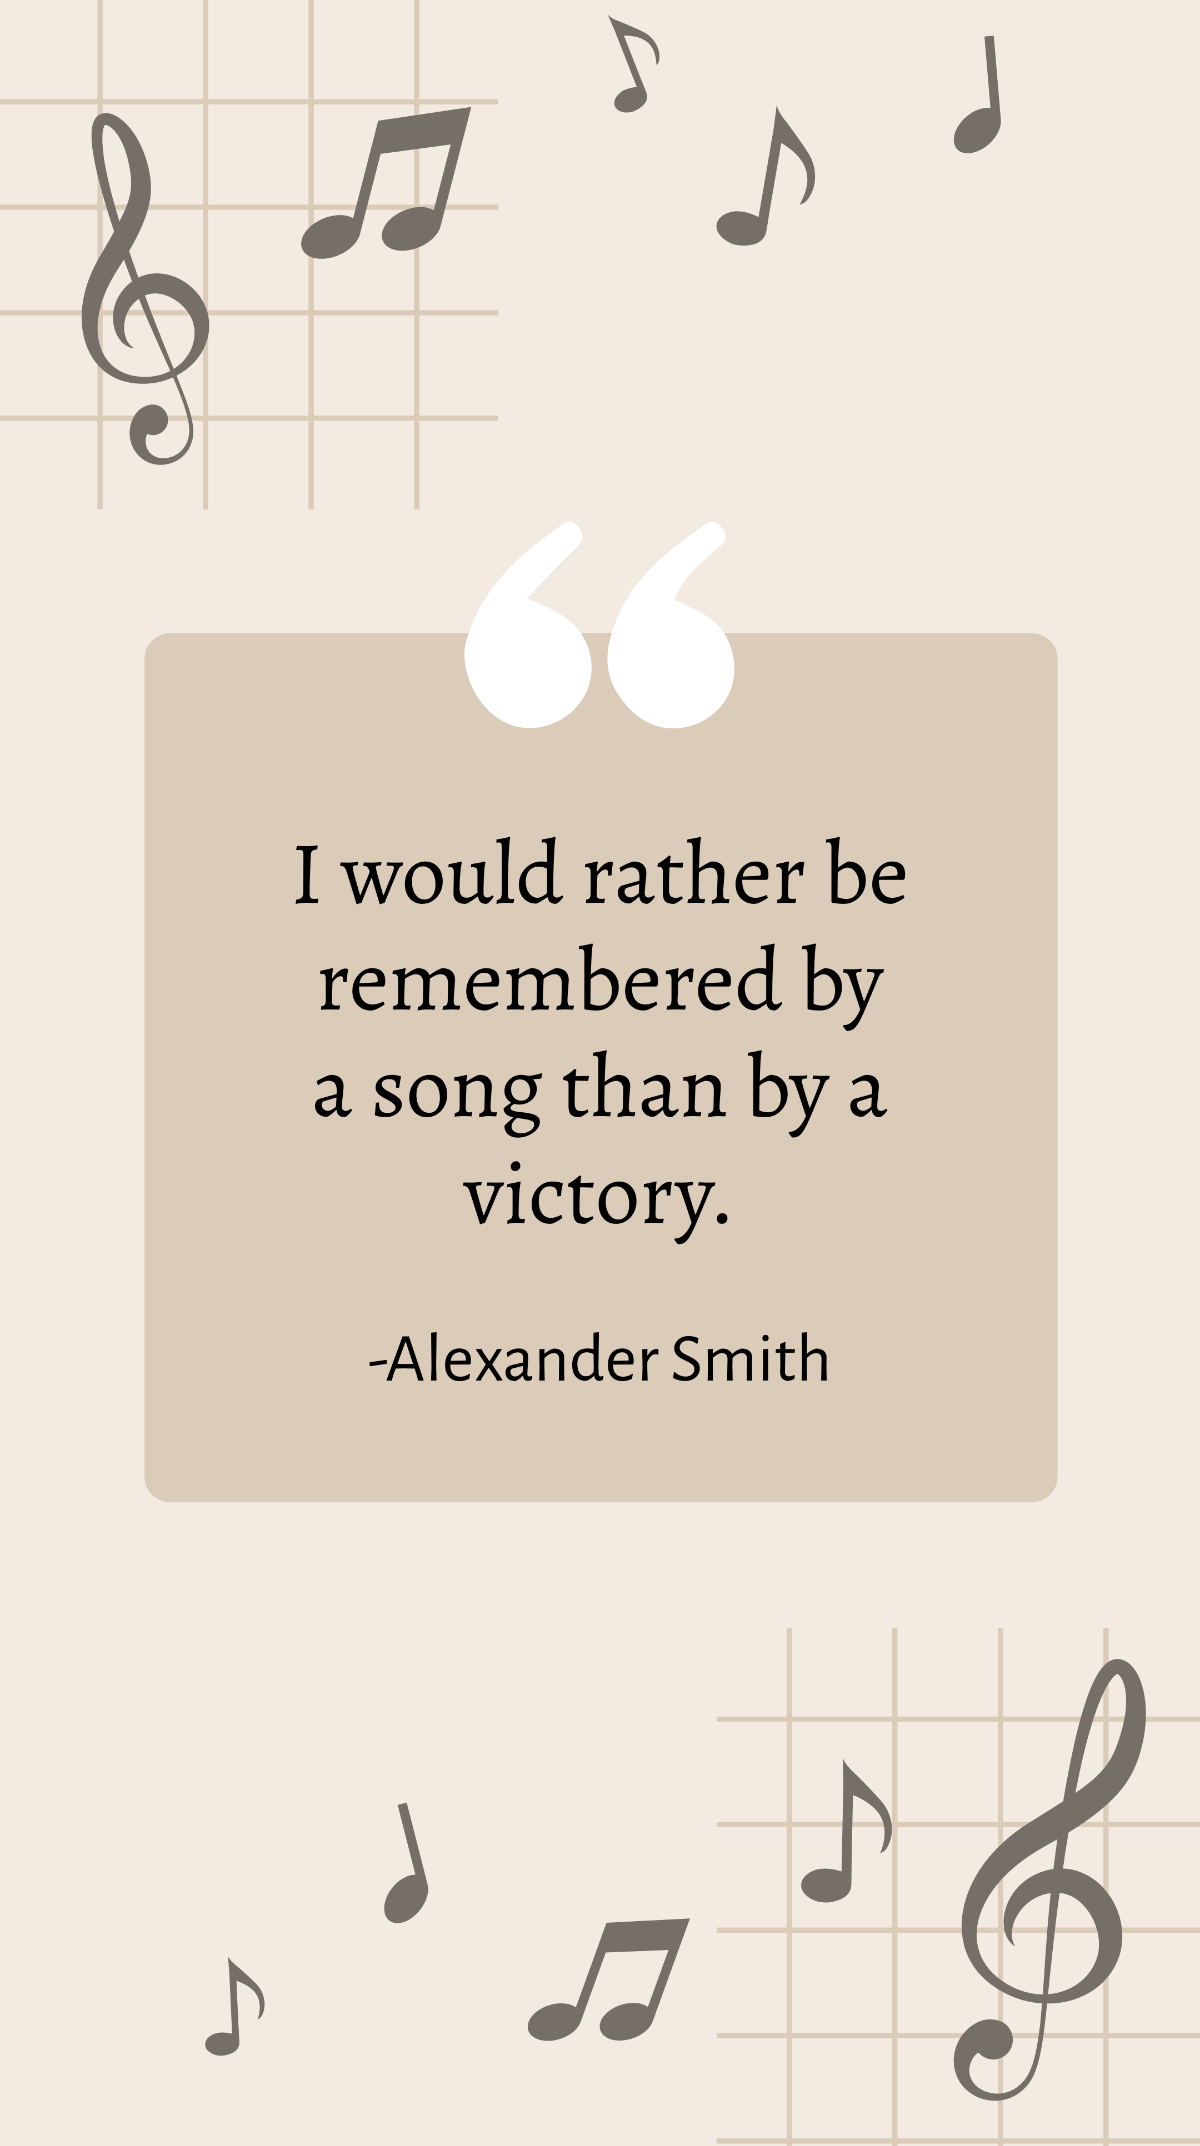 Alexander Smith - I would rather be remembered by a song than by a victory.  Template